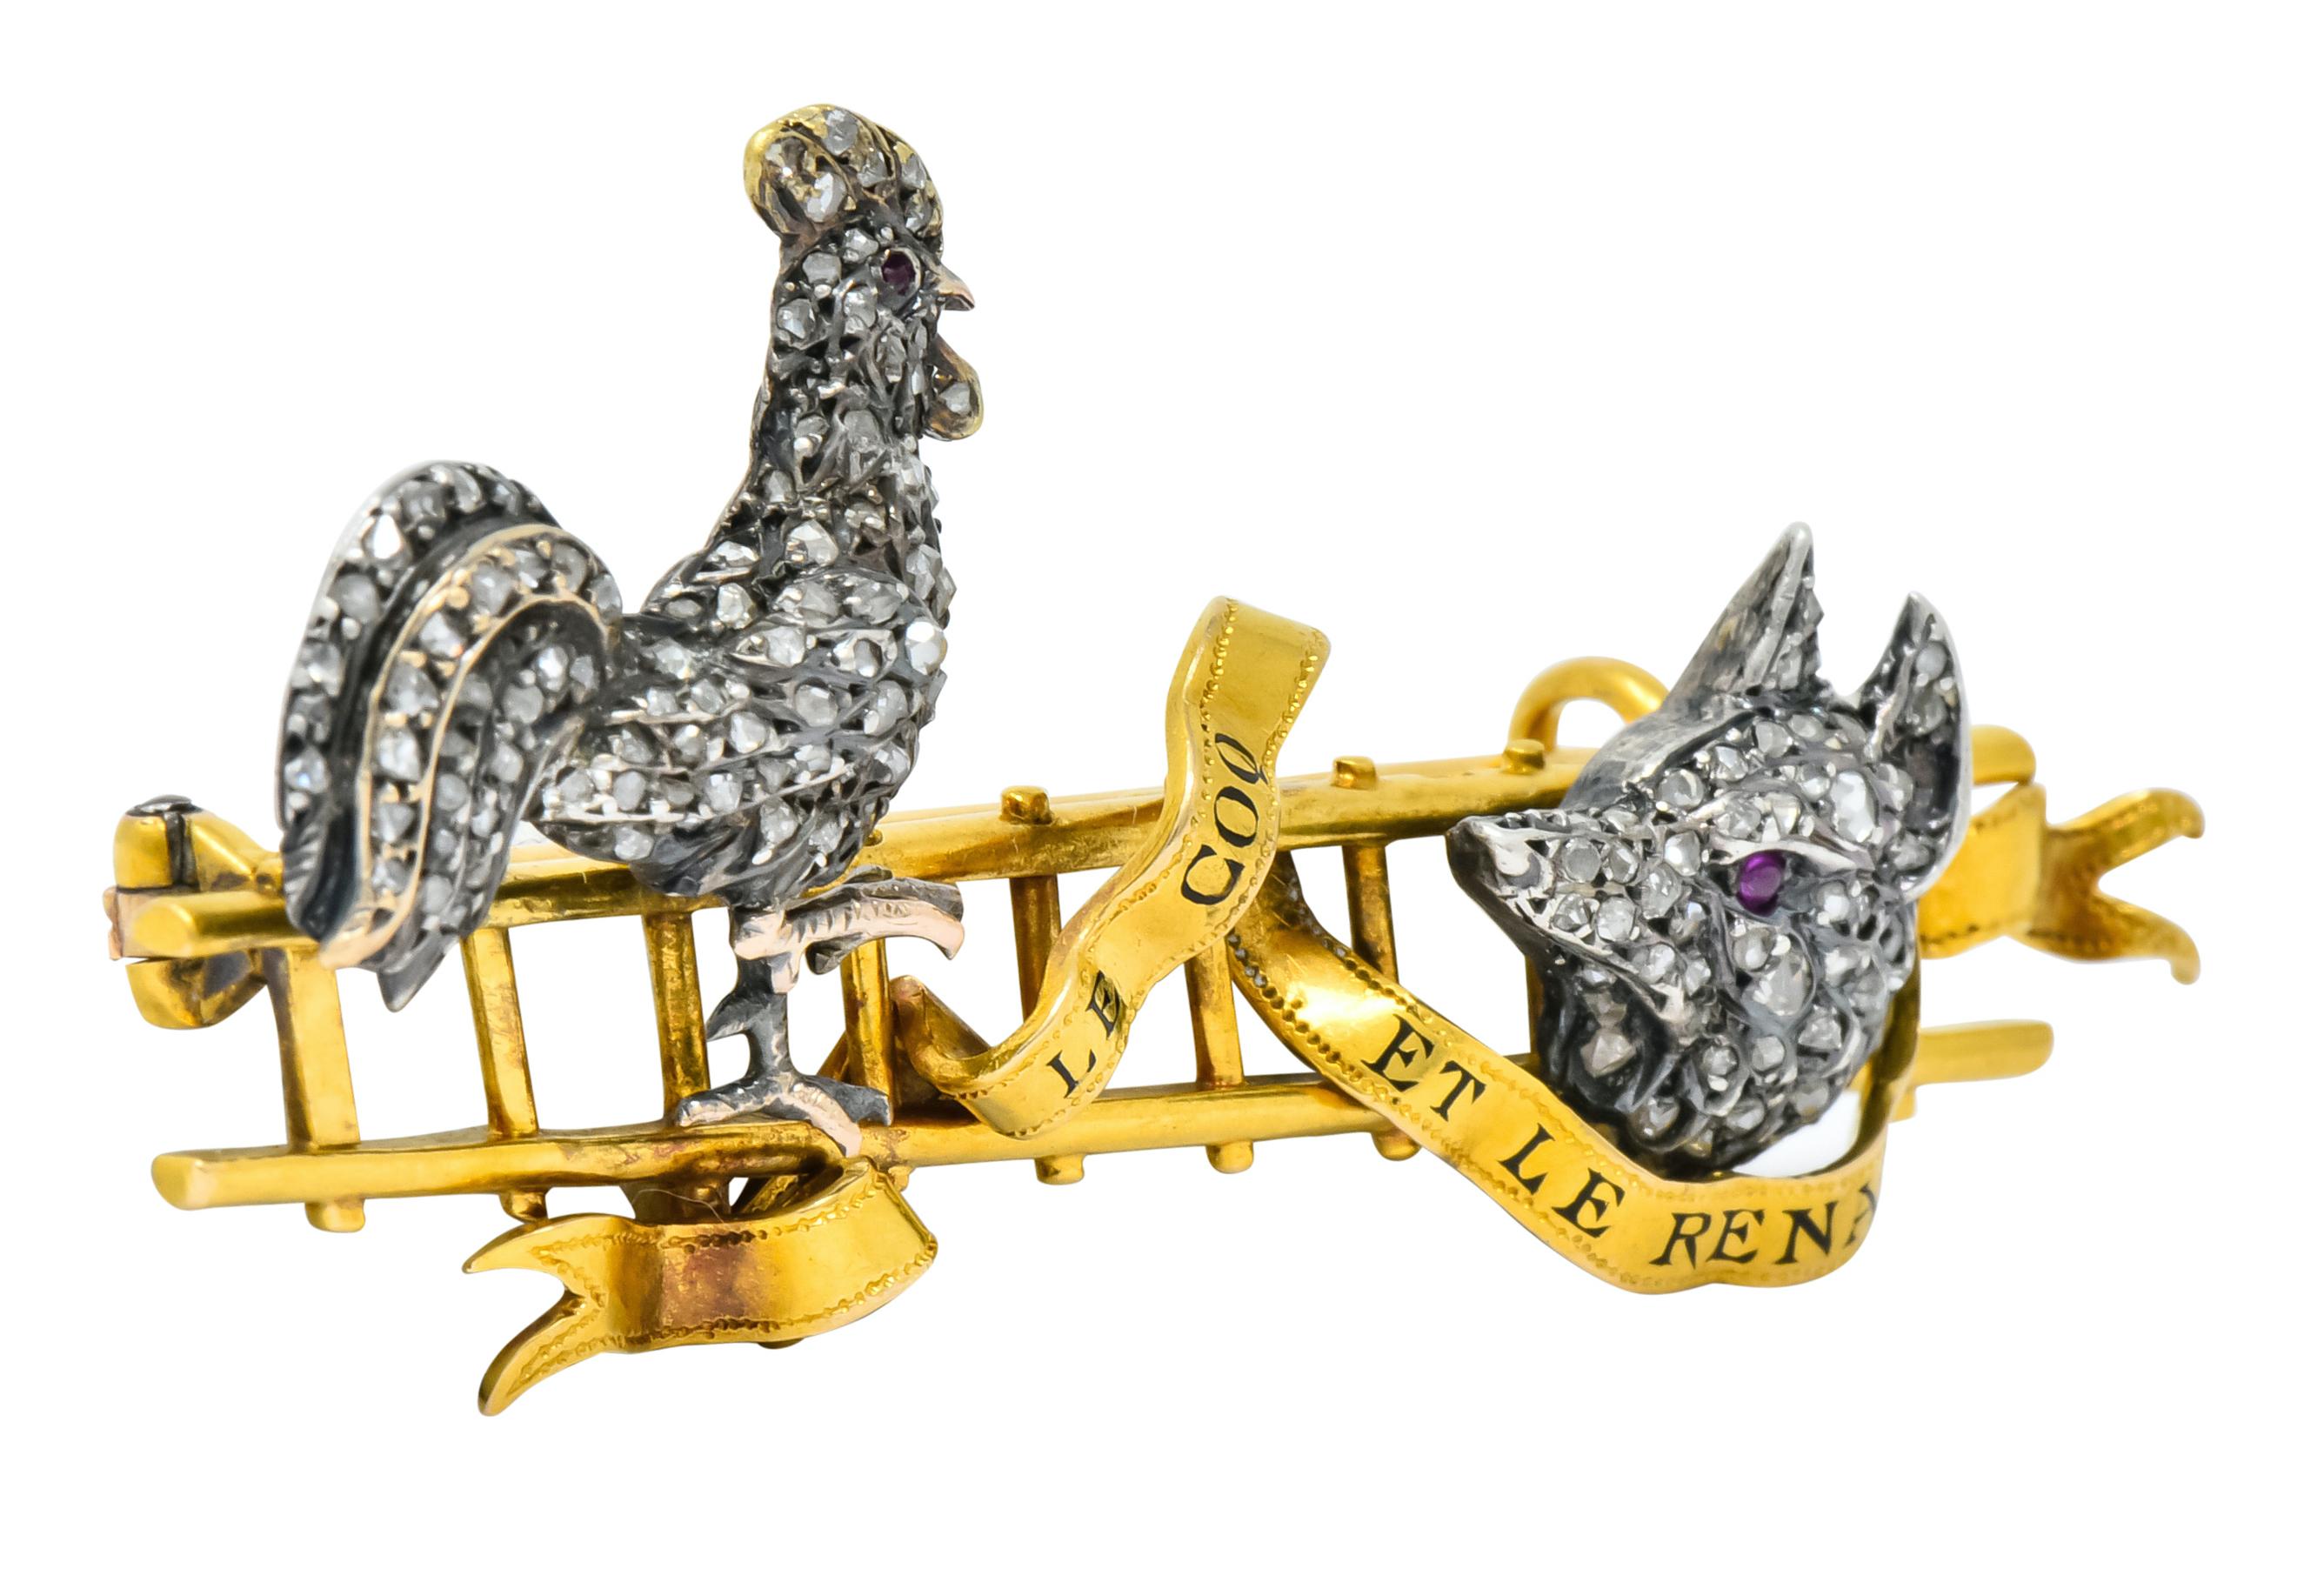 Designed as a silver rooster and fox perched on a gold ladder with a free-flowing ribbon 

“LE COQ ET LE RENARD” enameled throughout the ribbon, French for “The Rooster and the Fox